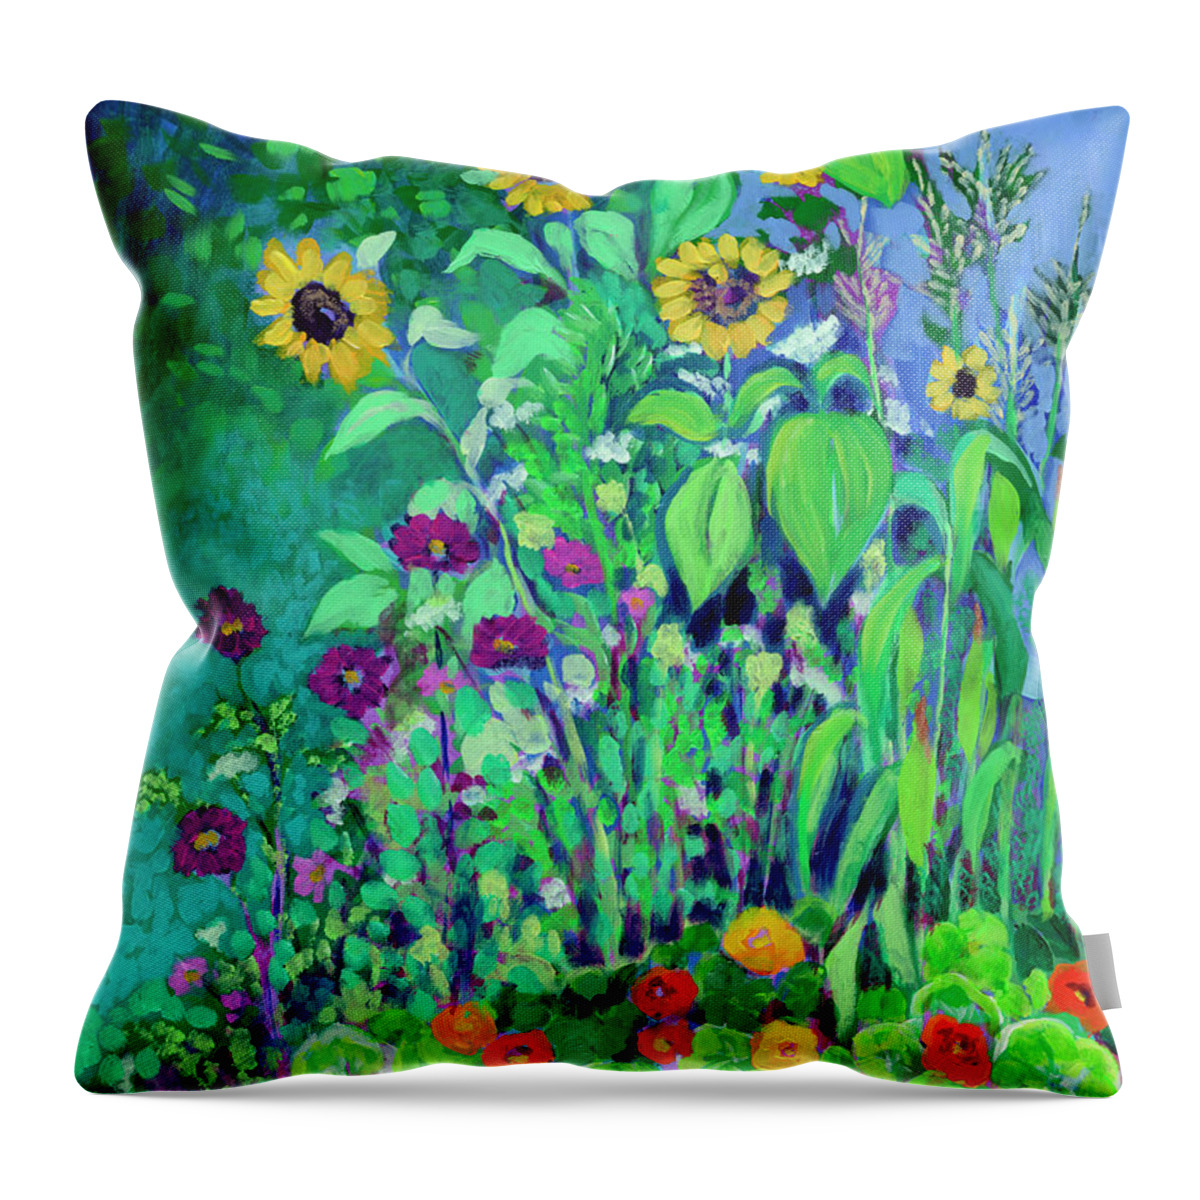 Floral Throw Pillow featuring the painting A Garden View by Jennifer Lommers